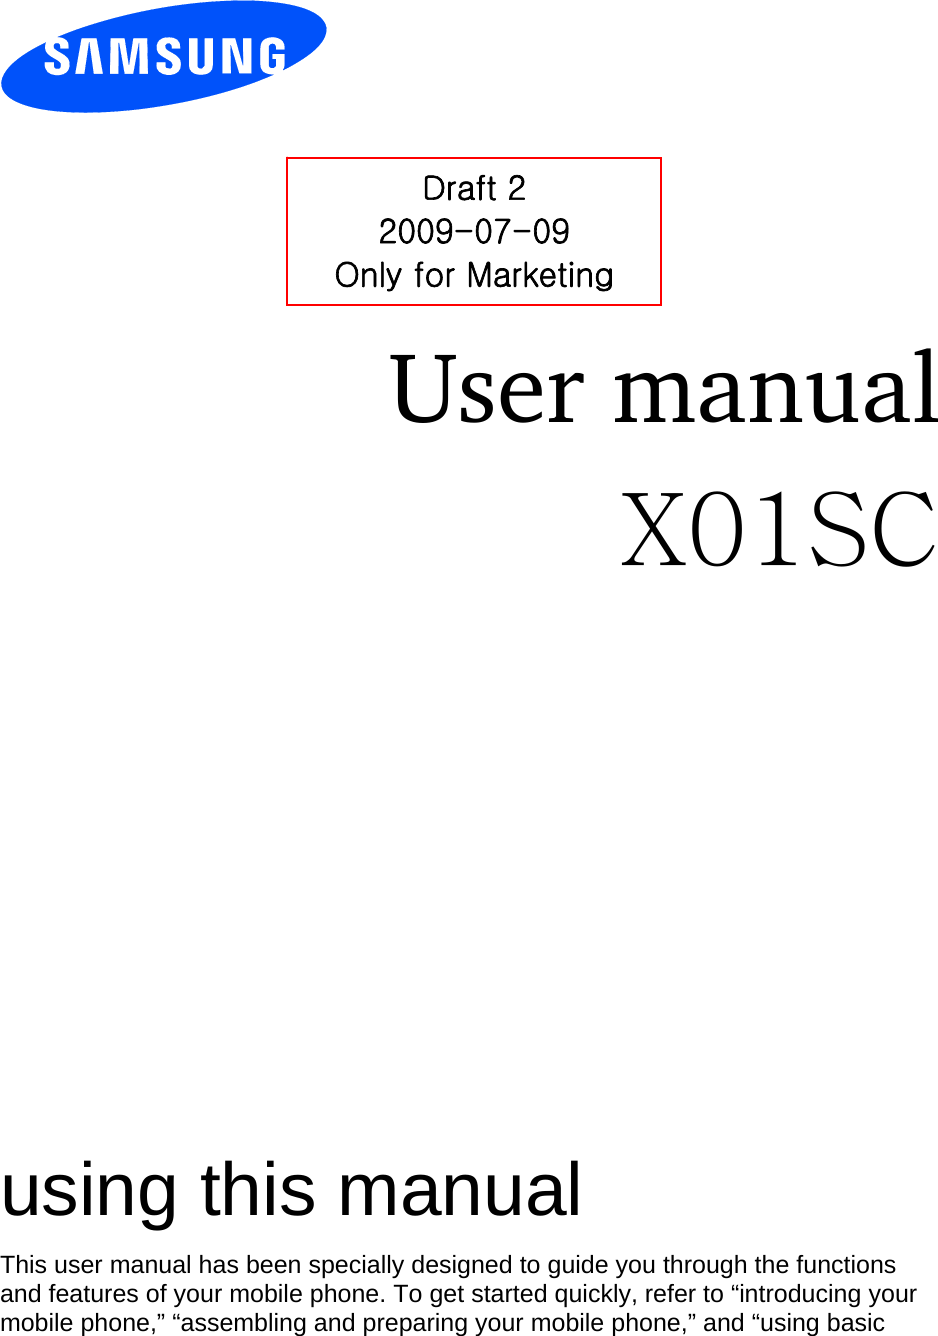          User manual X01SC                  using this manual This user manual has been specially designed to guide you through the functions and features of your mobile phone. To get started quickly, refer to “introducing your mobile phone,” “assembling and preparing your mobile phone,” and “using basic Draft 2 2009-07-09 Only for Marketing 